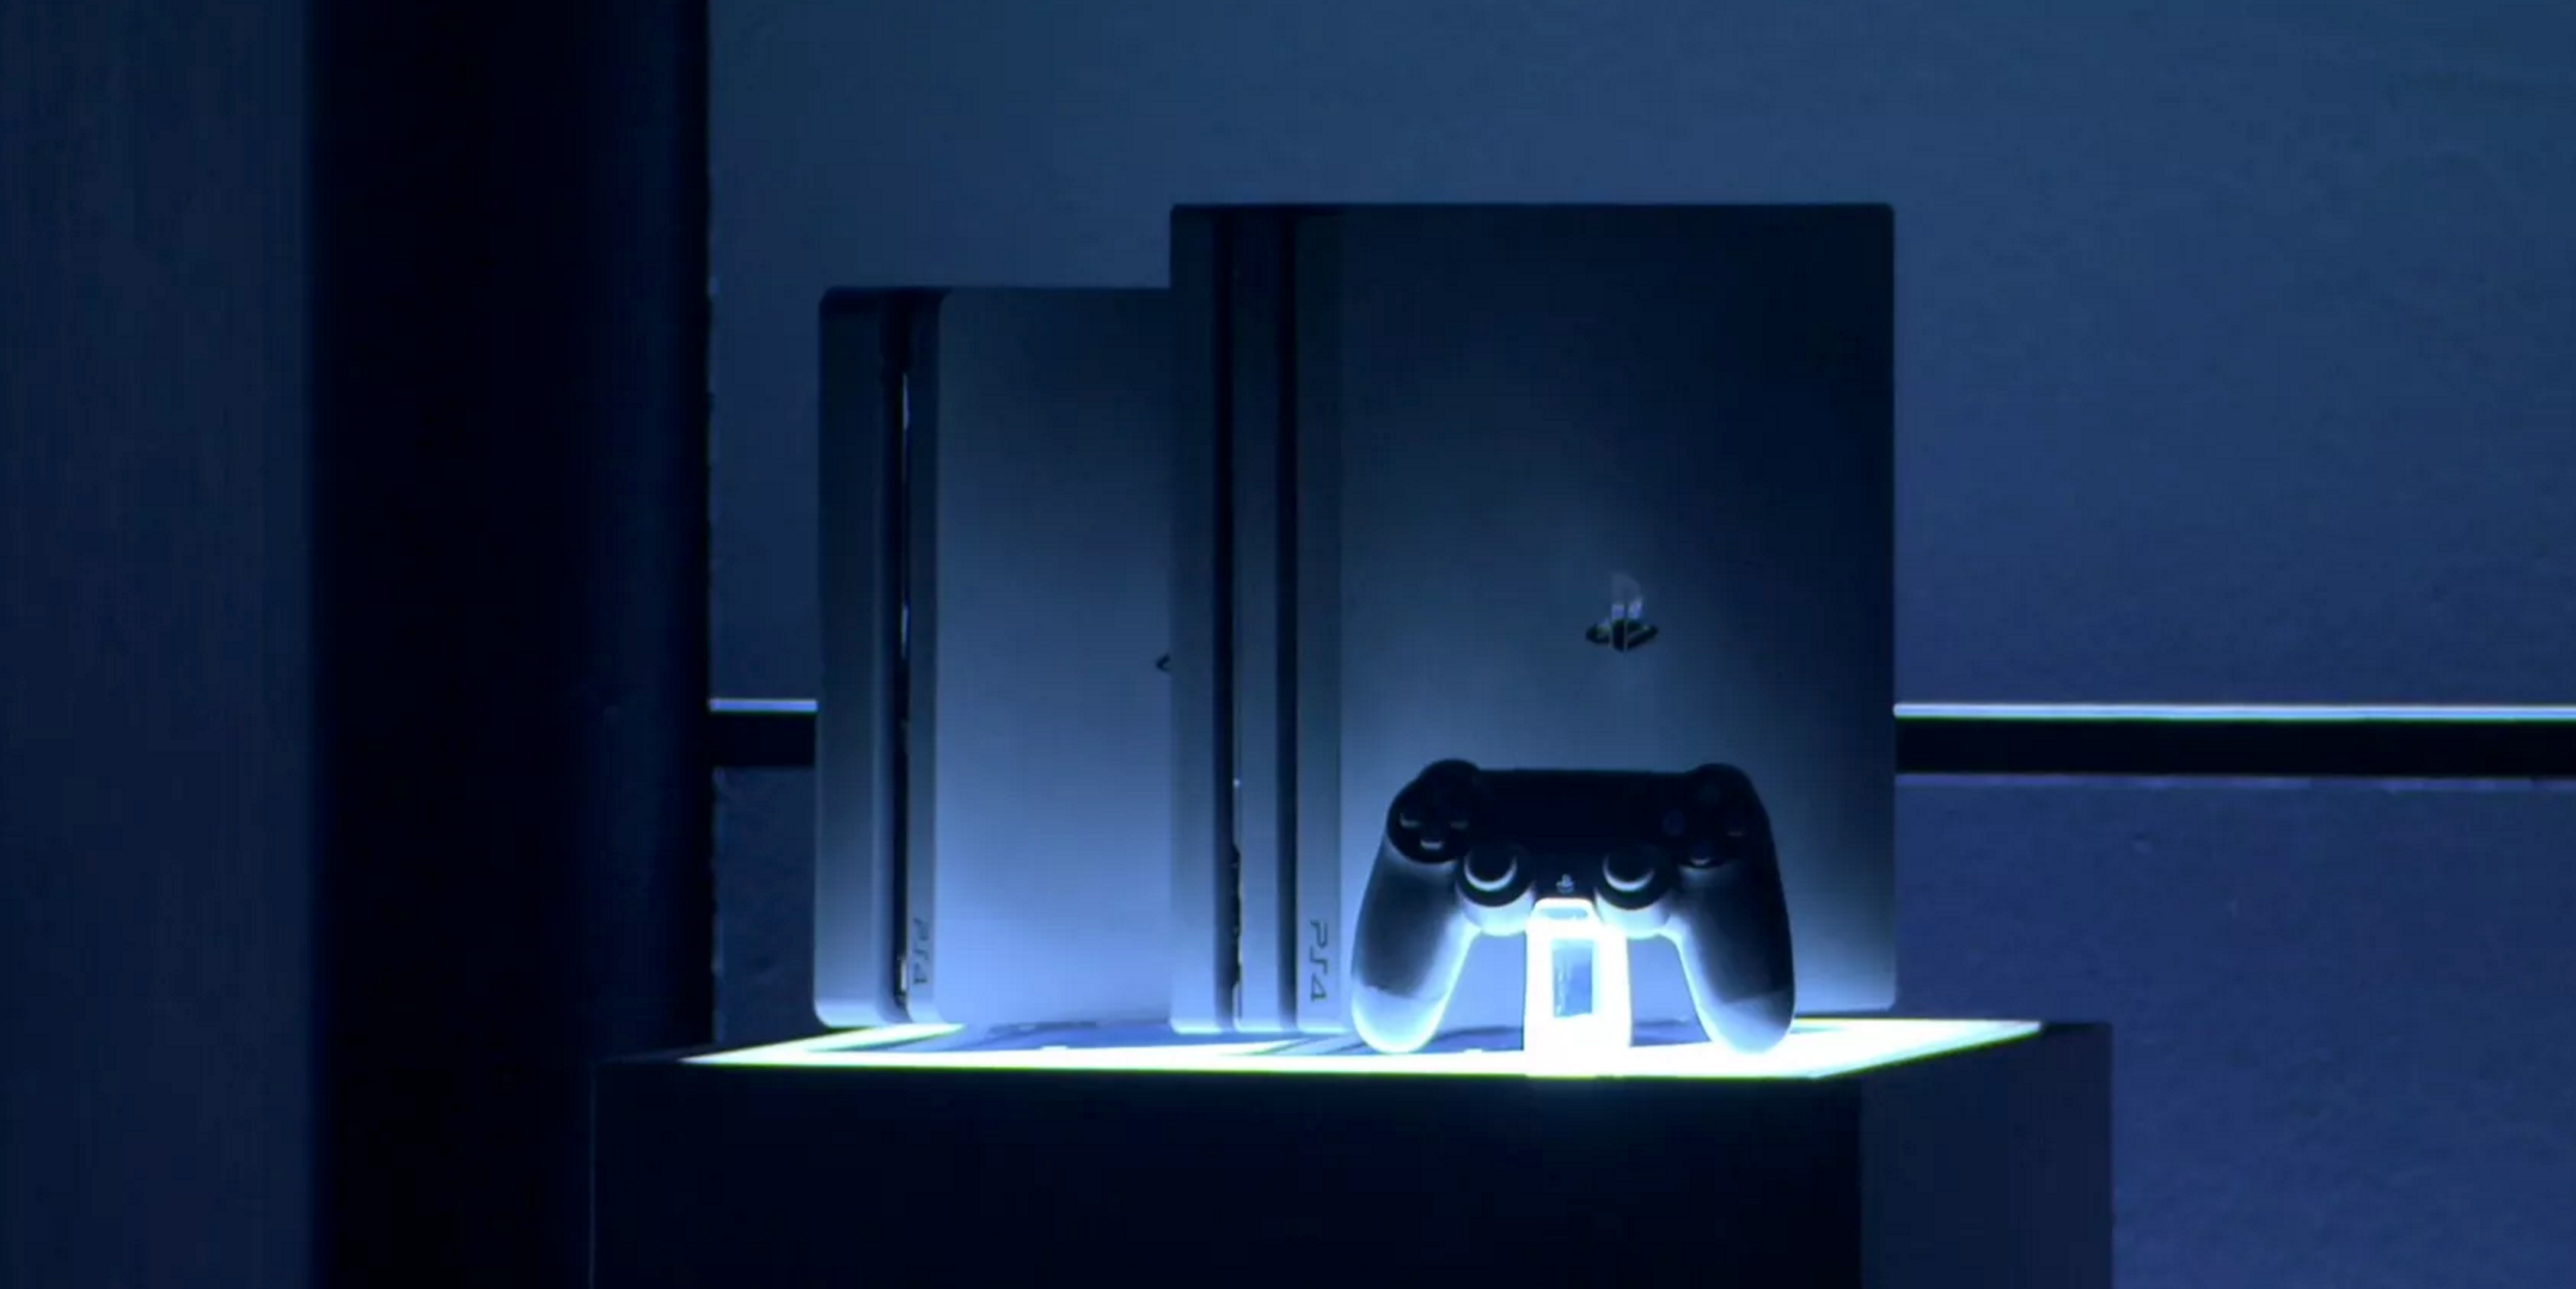 Sony officially unveils the 4K/HDR-ready PlayStation 4 Pro console, Slim, and